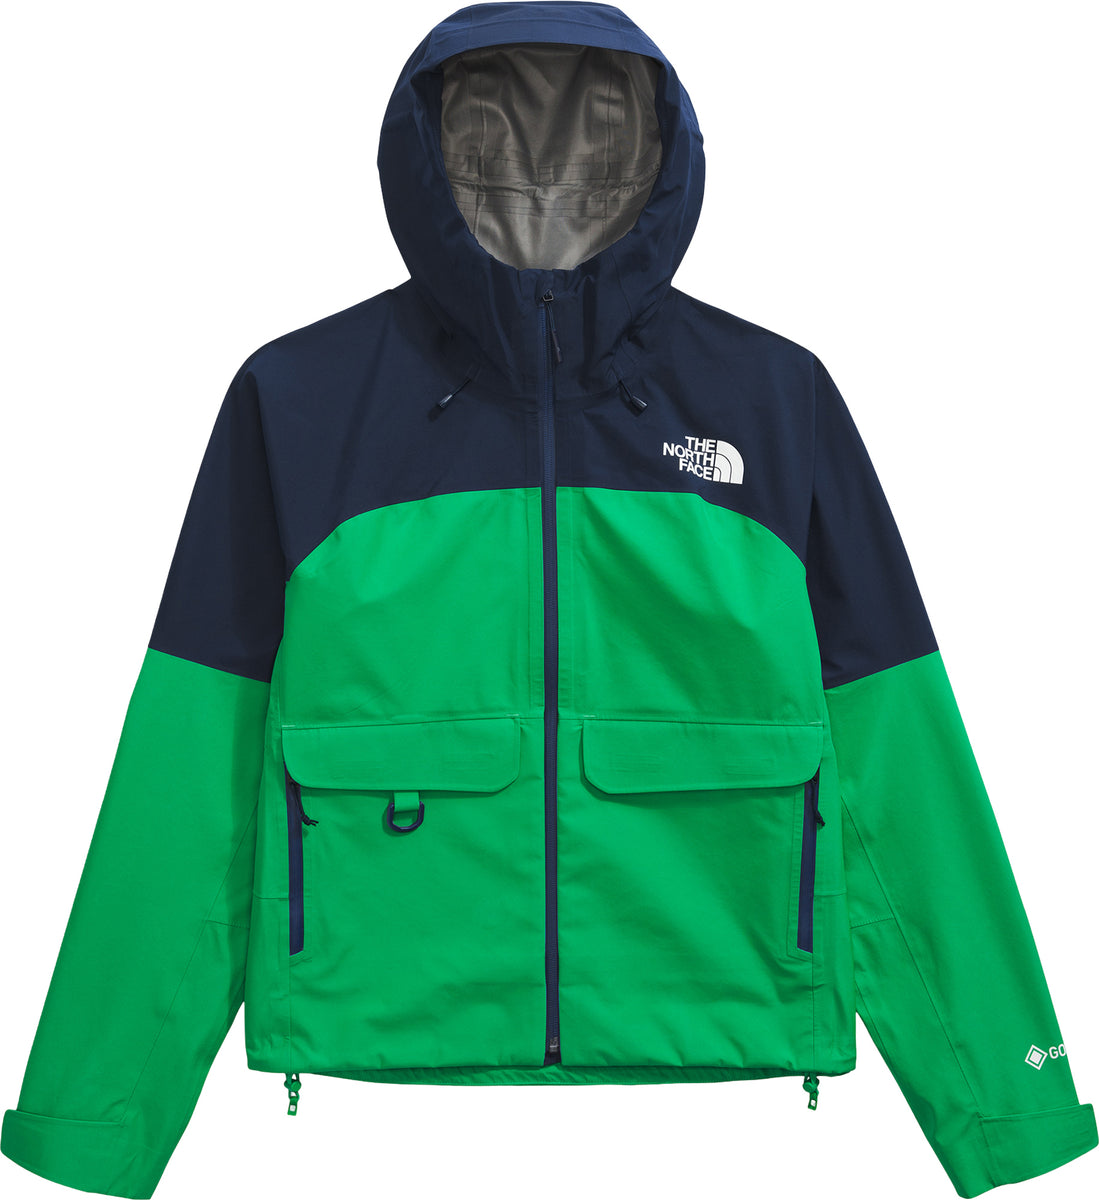 The North Face Devils Brook Gore-Tex Jacket - Women's